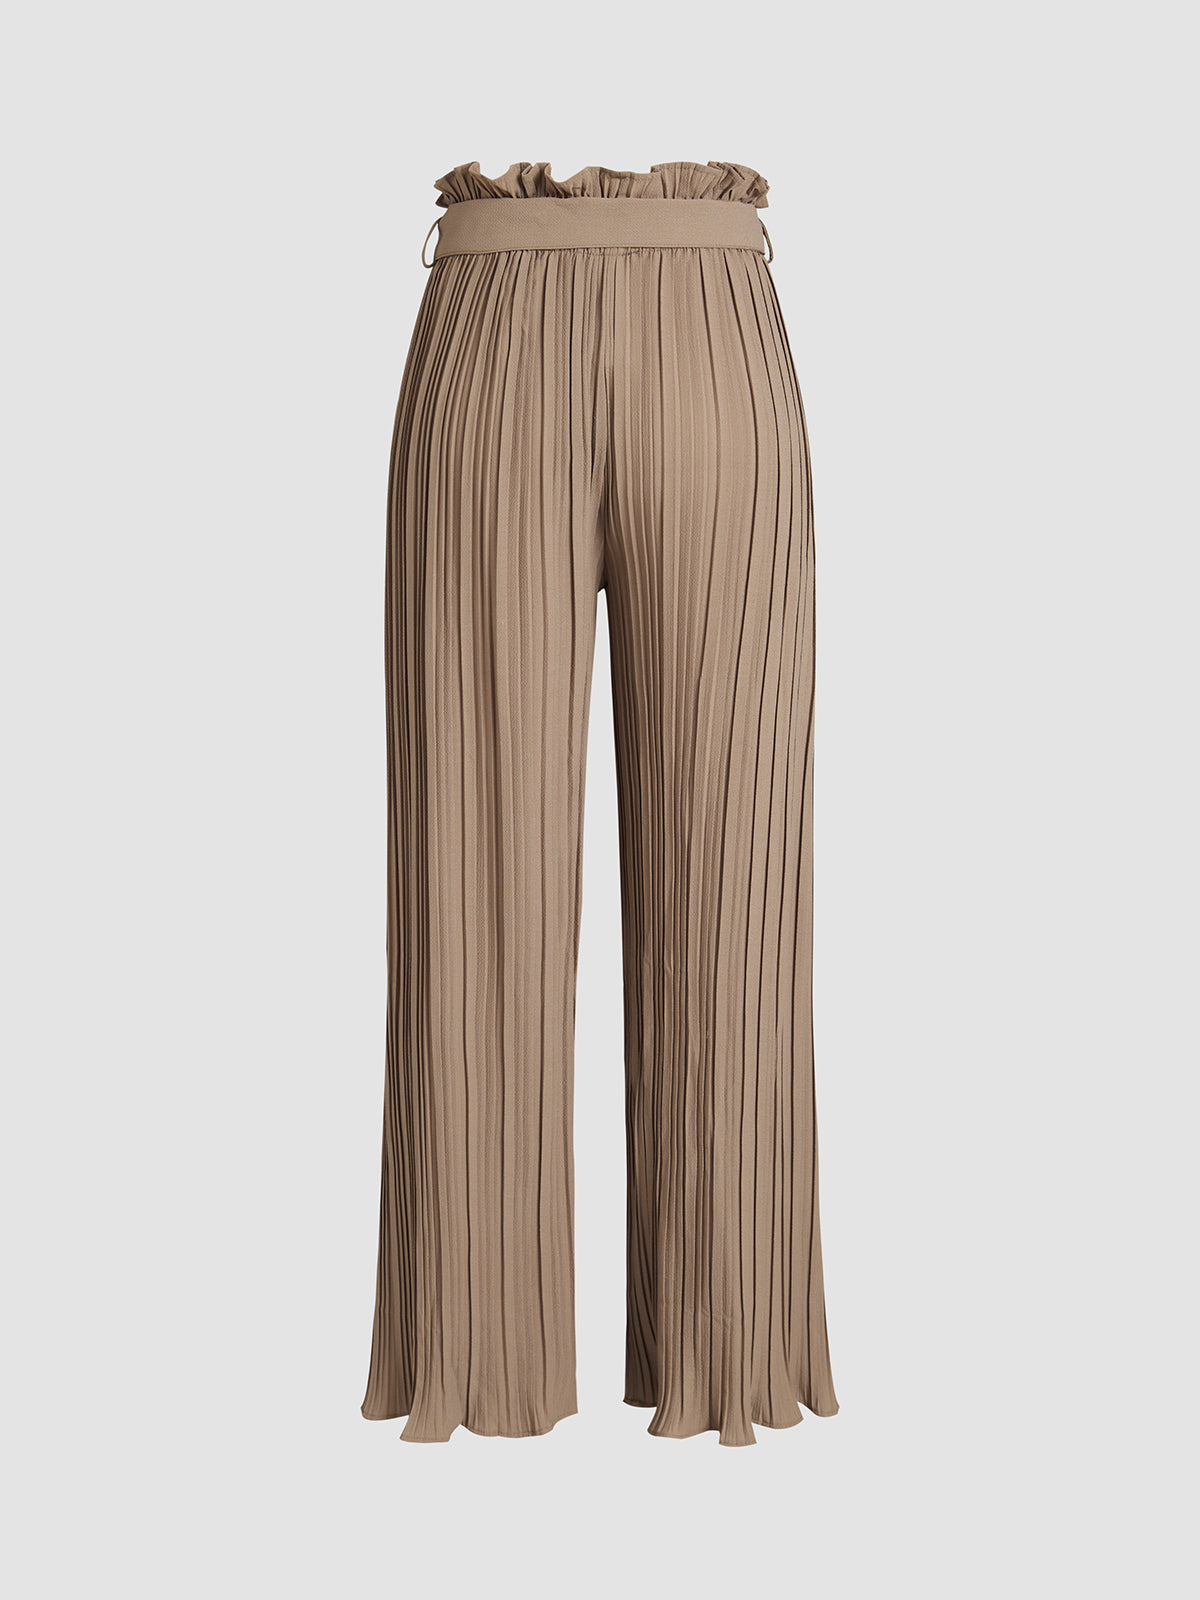 Tie Front Pleated Wide Leg Paperbag Pants